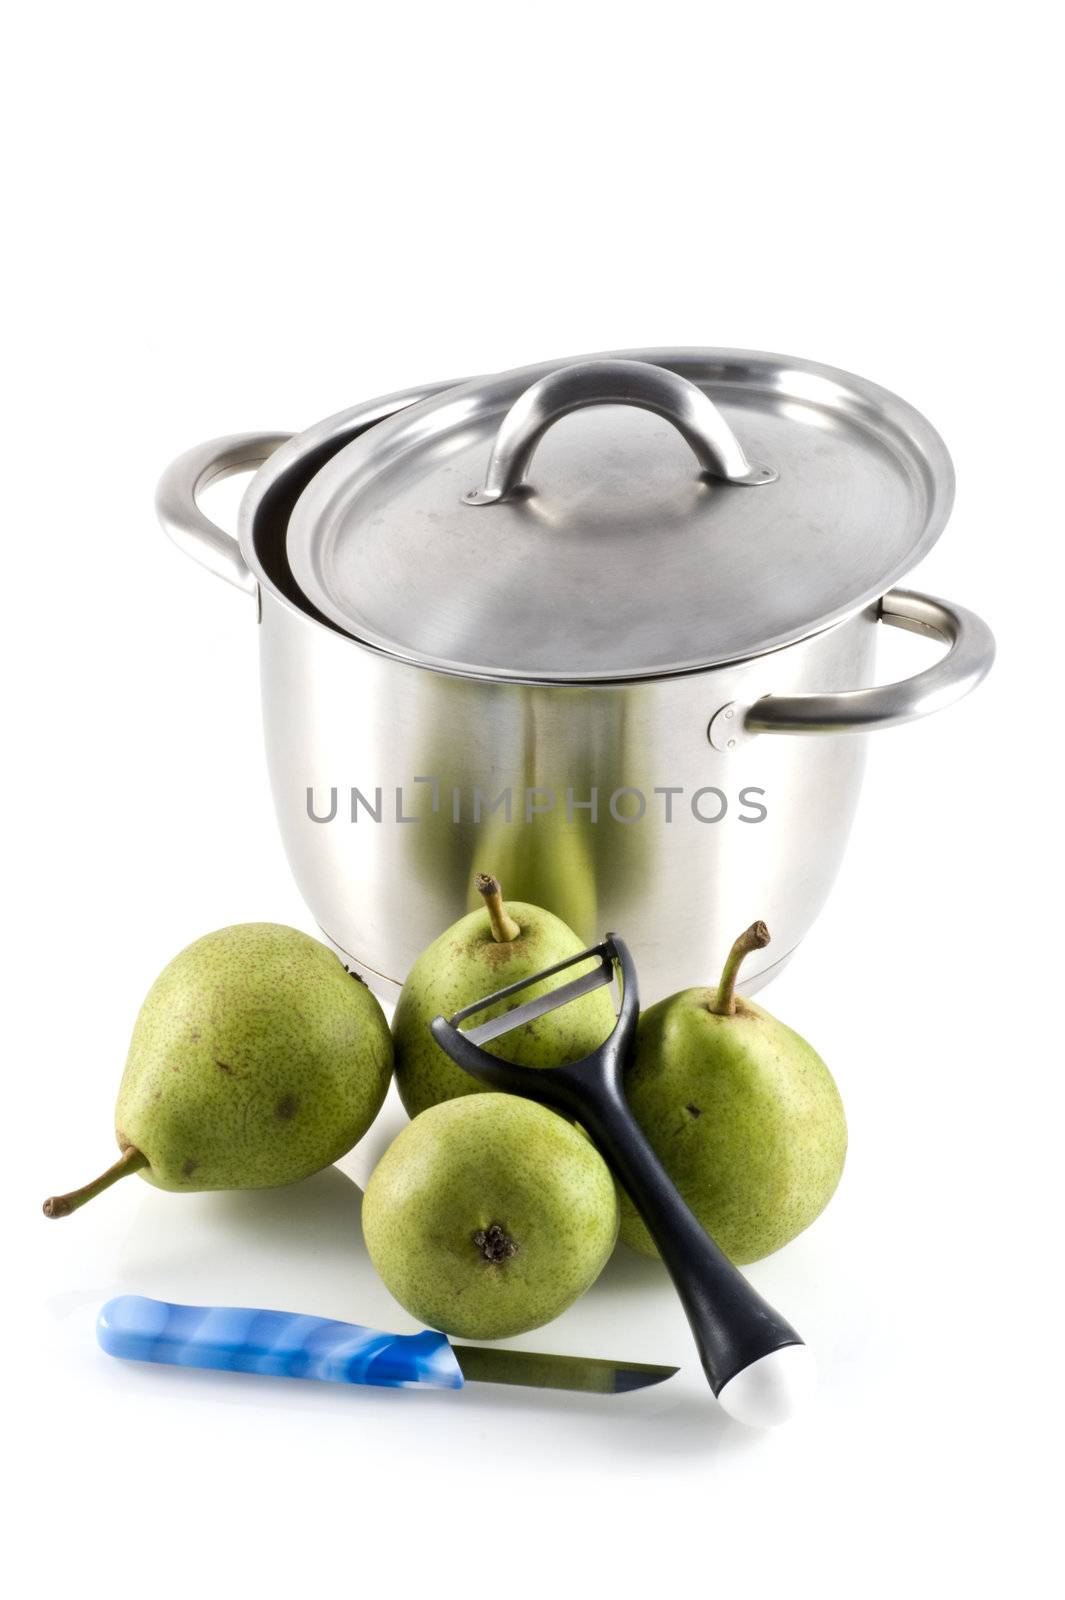 Pan and pears isolated on a white background.